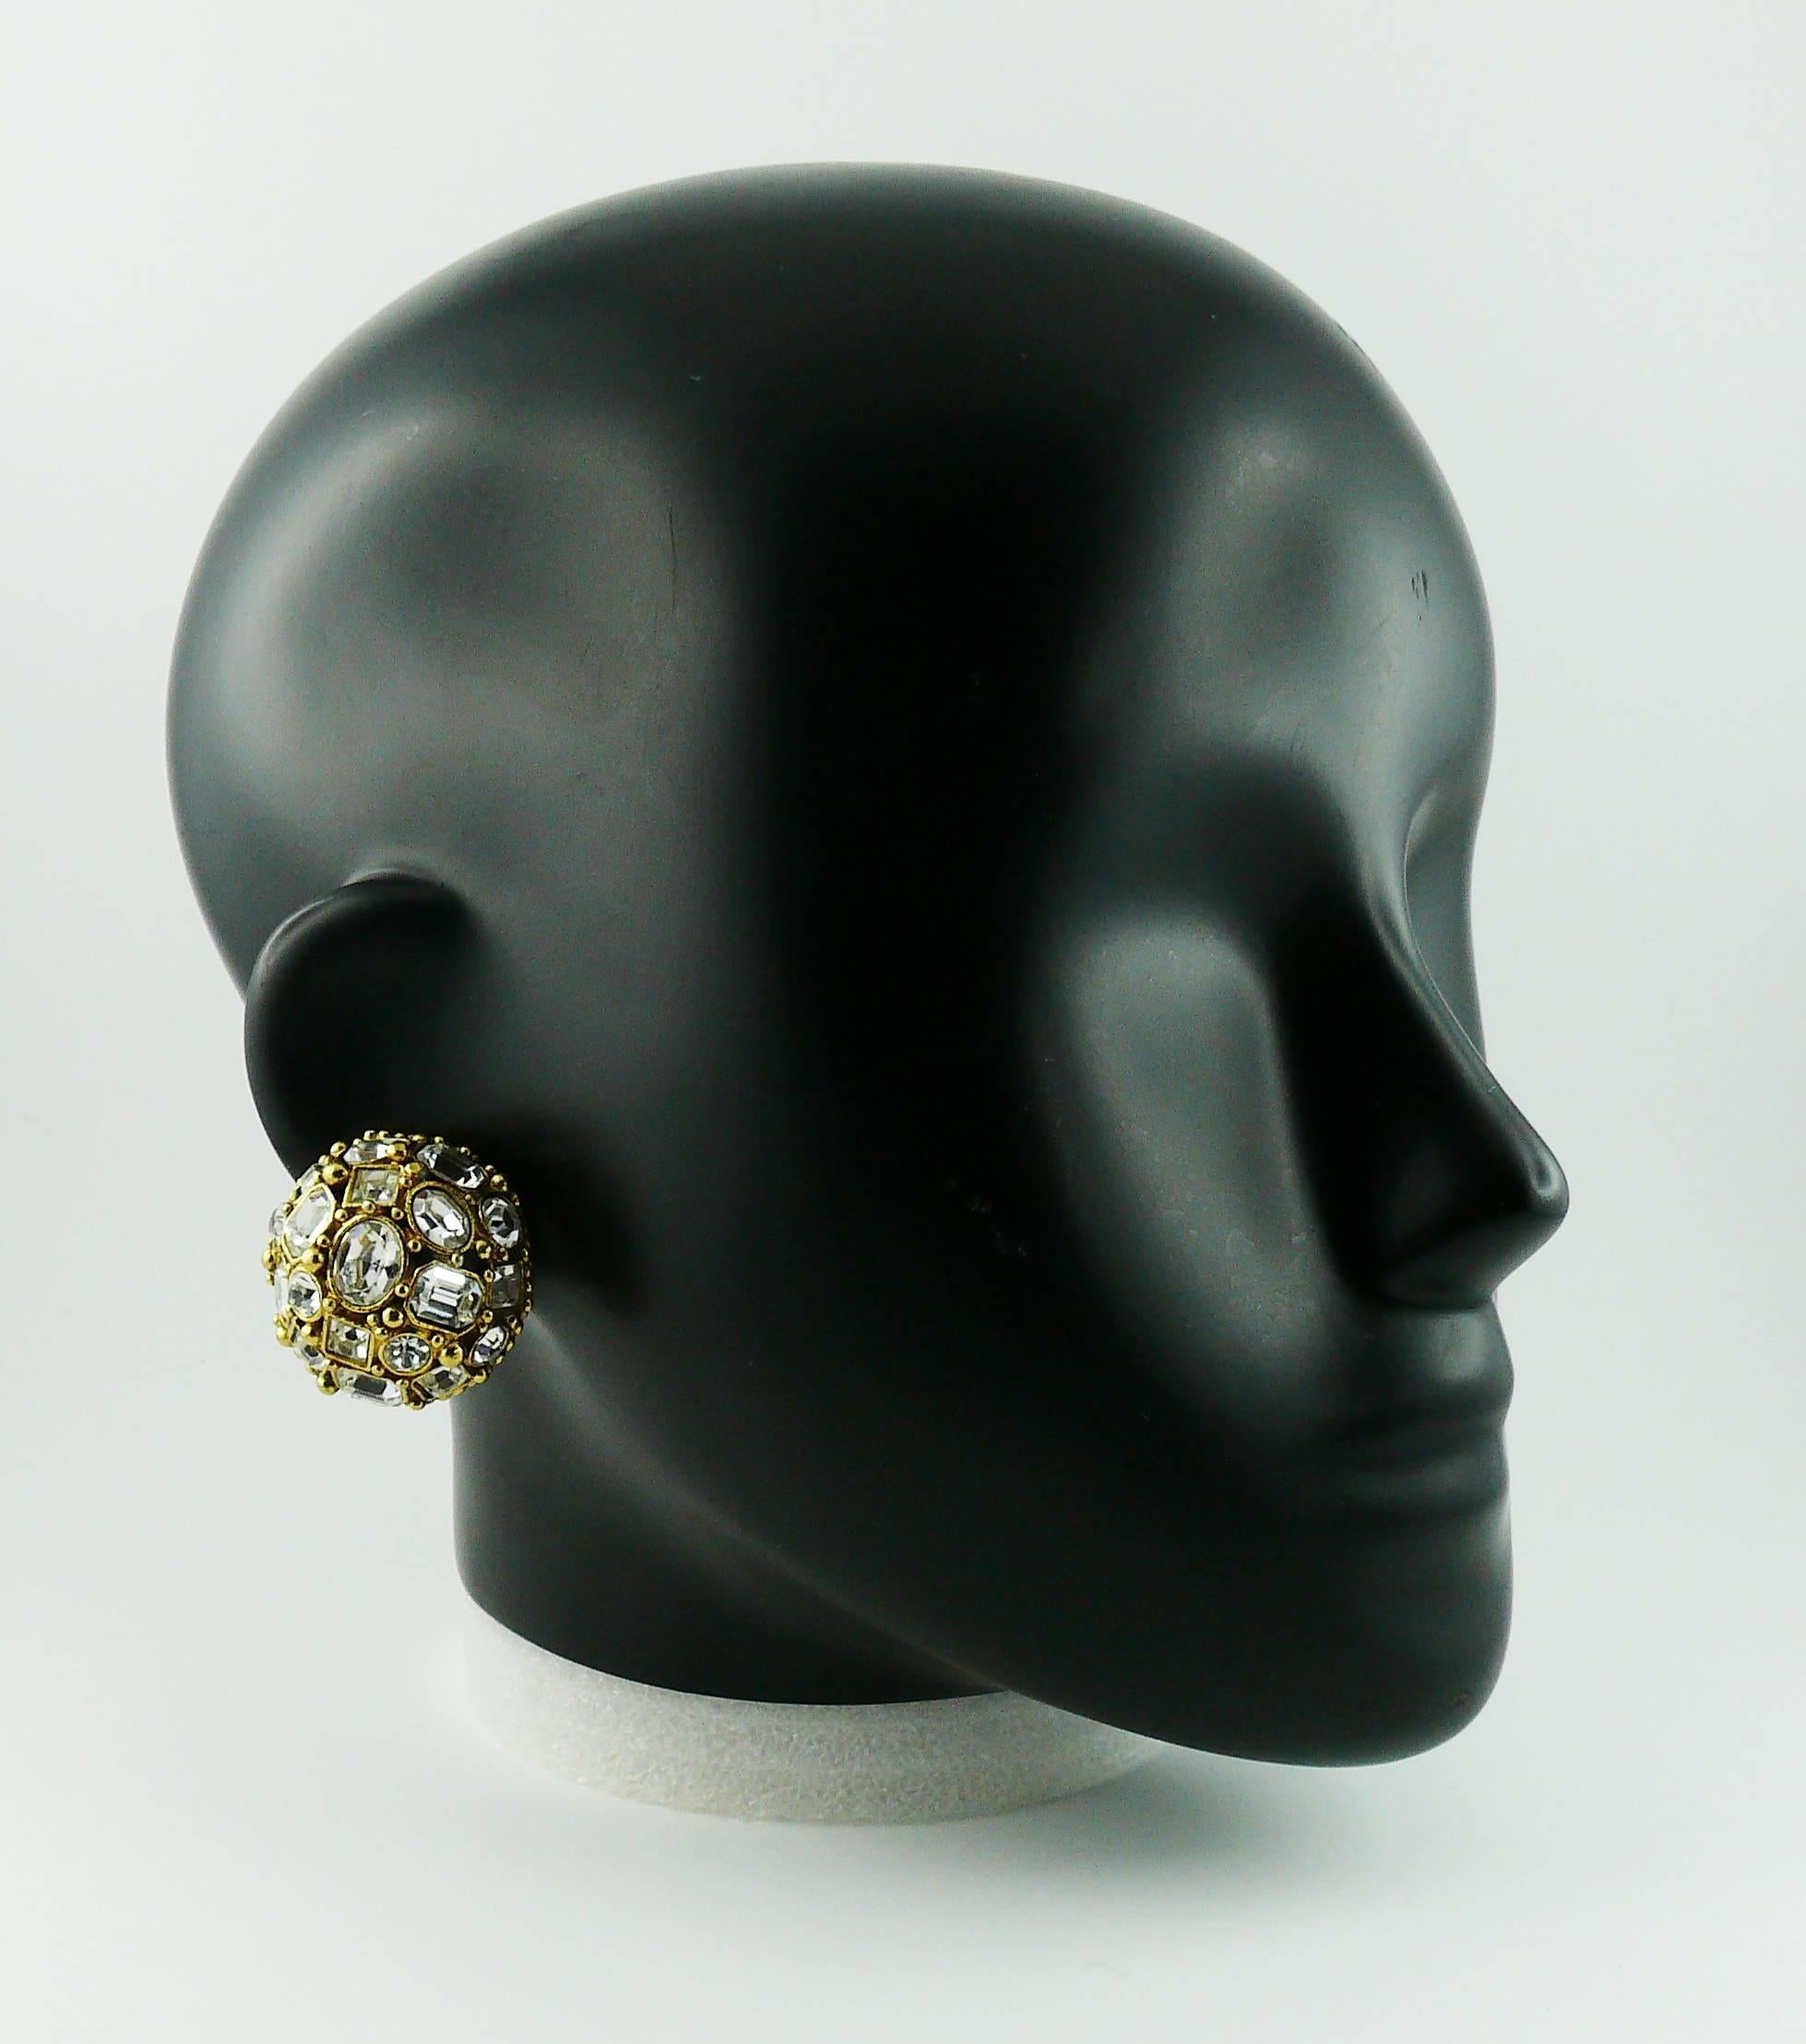 CHRISTIAN DIOR vintage gold tone opulent domed clip-on earrings embellished with clear crystals.

Marked CHRISTIAN DIOR Boutique.

JEWELRY CONDITION CHART
- New or never worn : item is in pristine condition with no noticeable imperfections
-